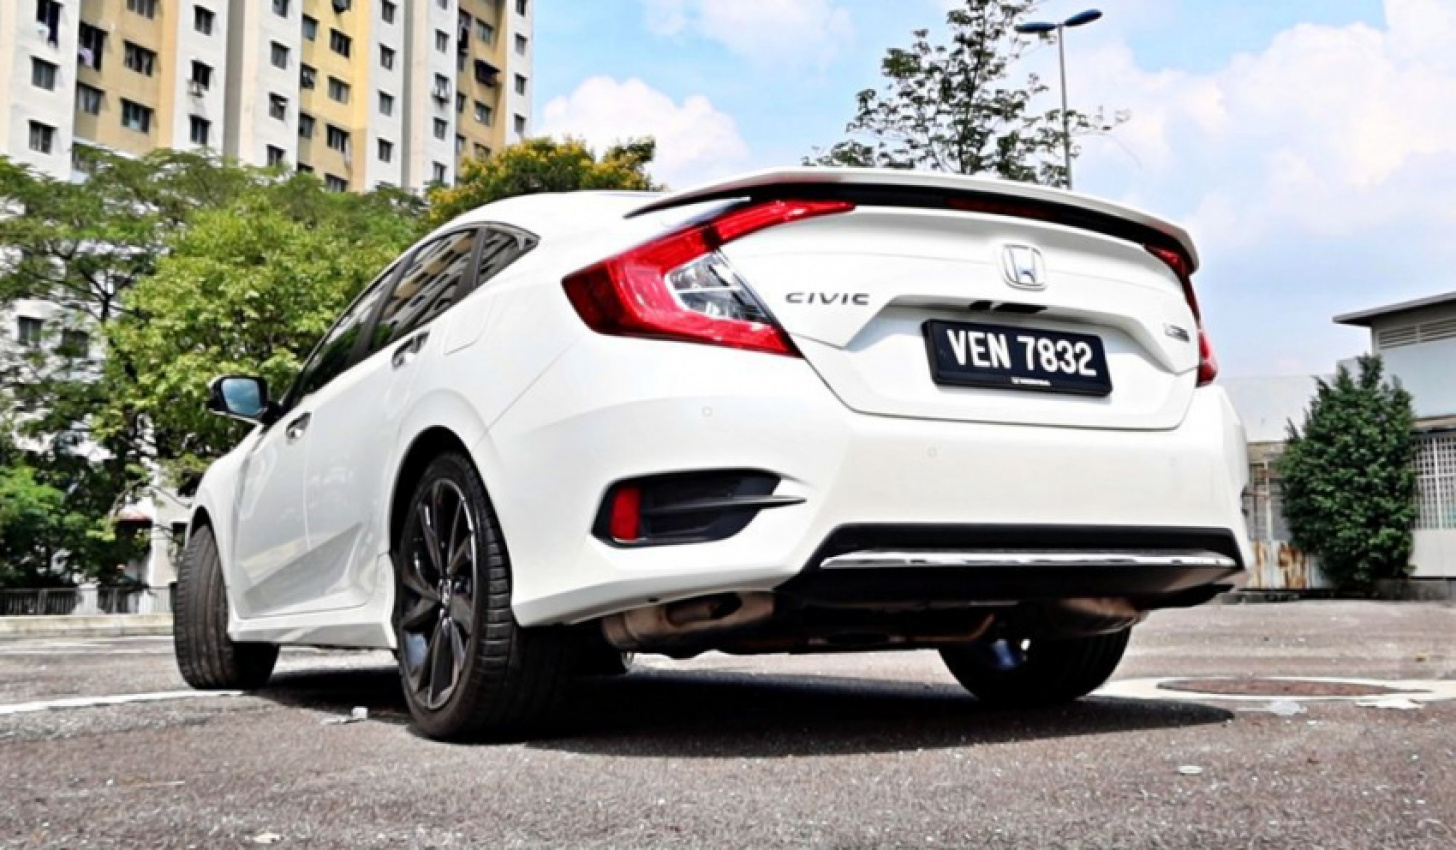 autos, cars, honda, reviews, 1.5 tc-p, android, c-segment, civic, facelift, fc, honda civic, malaysia, michelin, pilot sport 4, review, vtec turbo, android, review: 2021 honda civic 1.5 tc-p - where do we go from here?